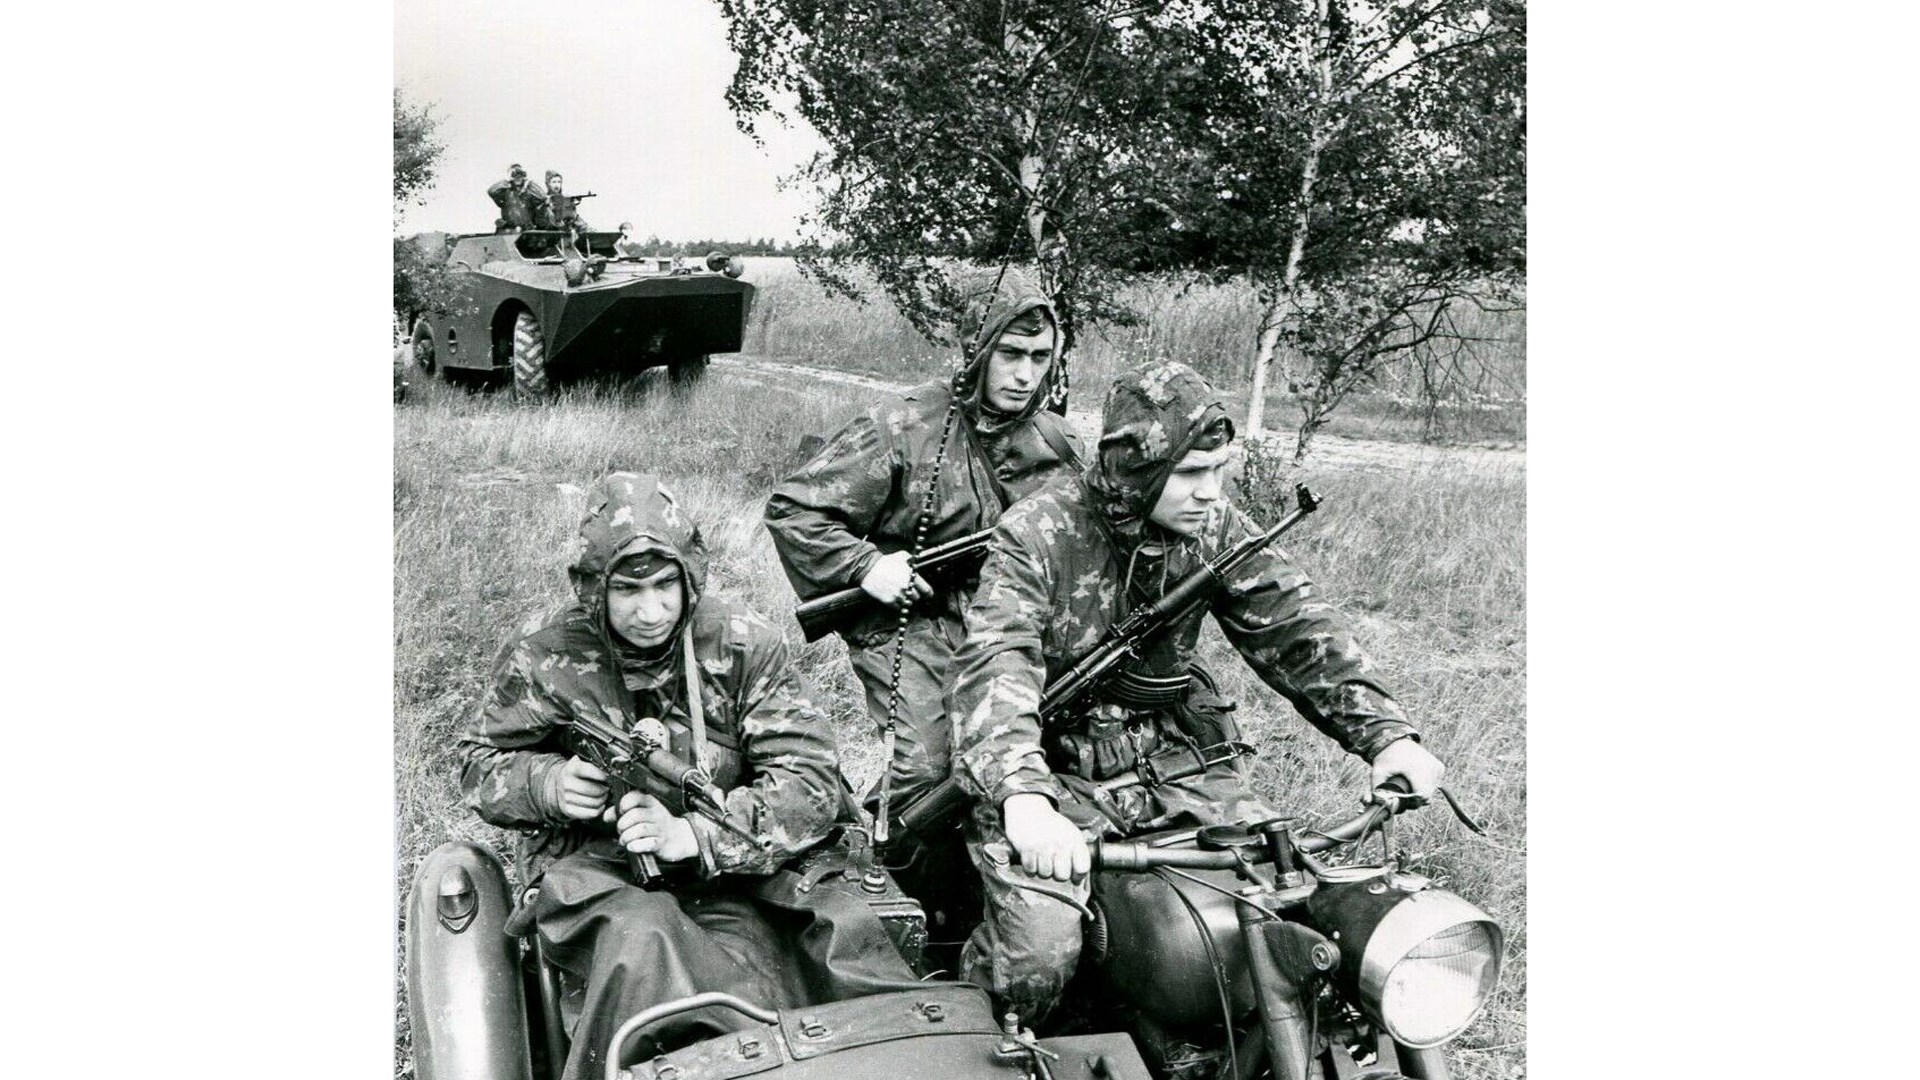 Soviet mechanized troops armed with the AKM - the most ubiquitous firearm the world has ever known. Courtesy of Tom Laemlein